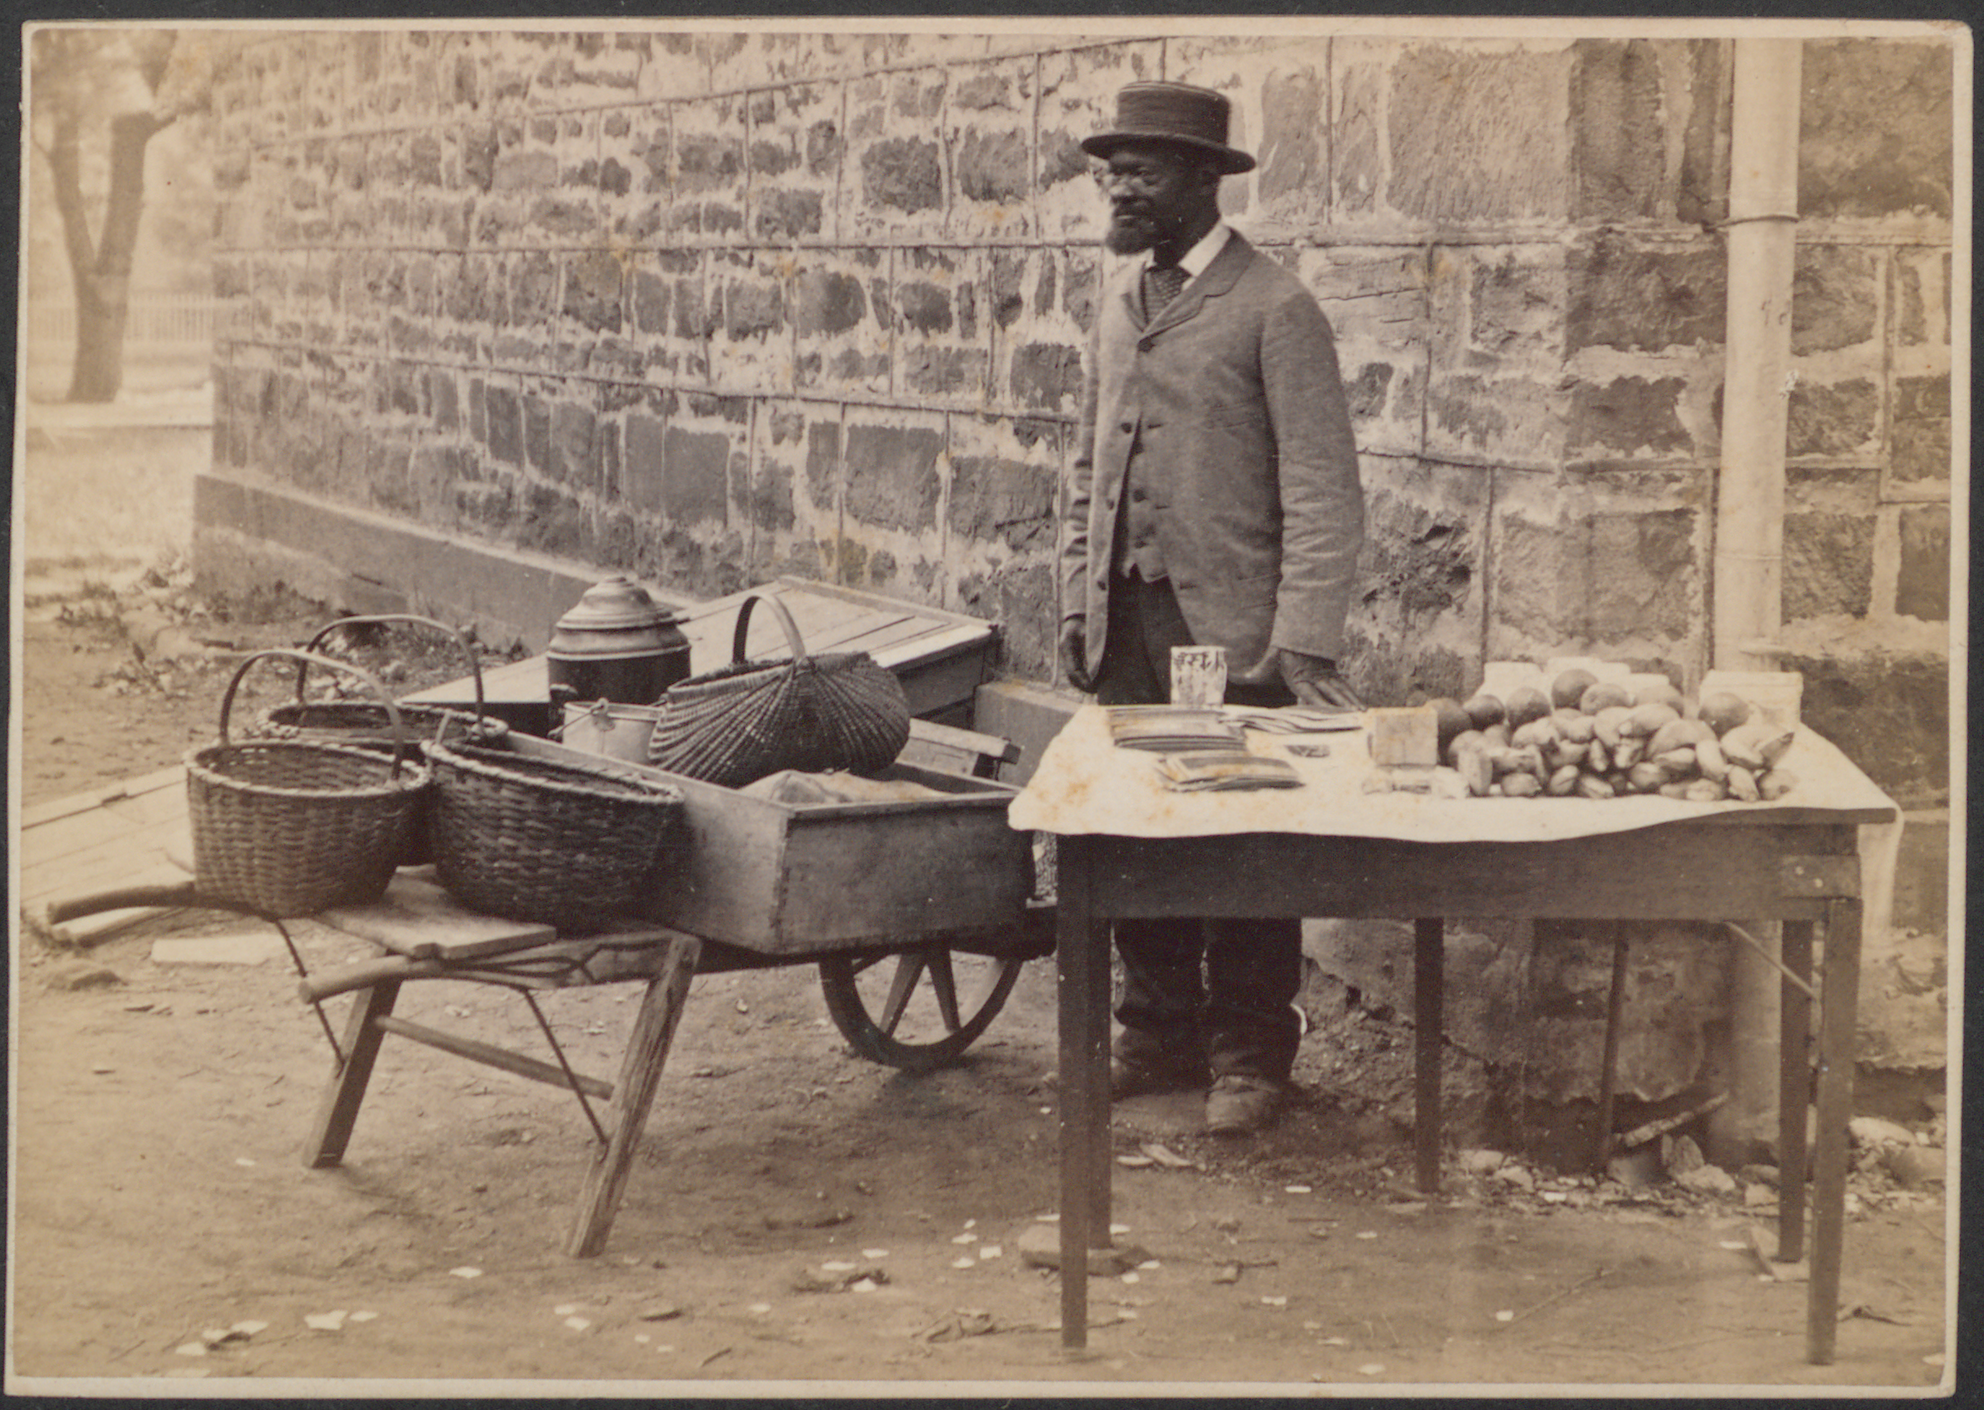 James C. Johnson with goods for sale